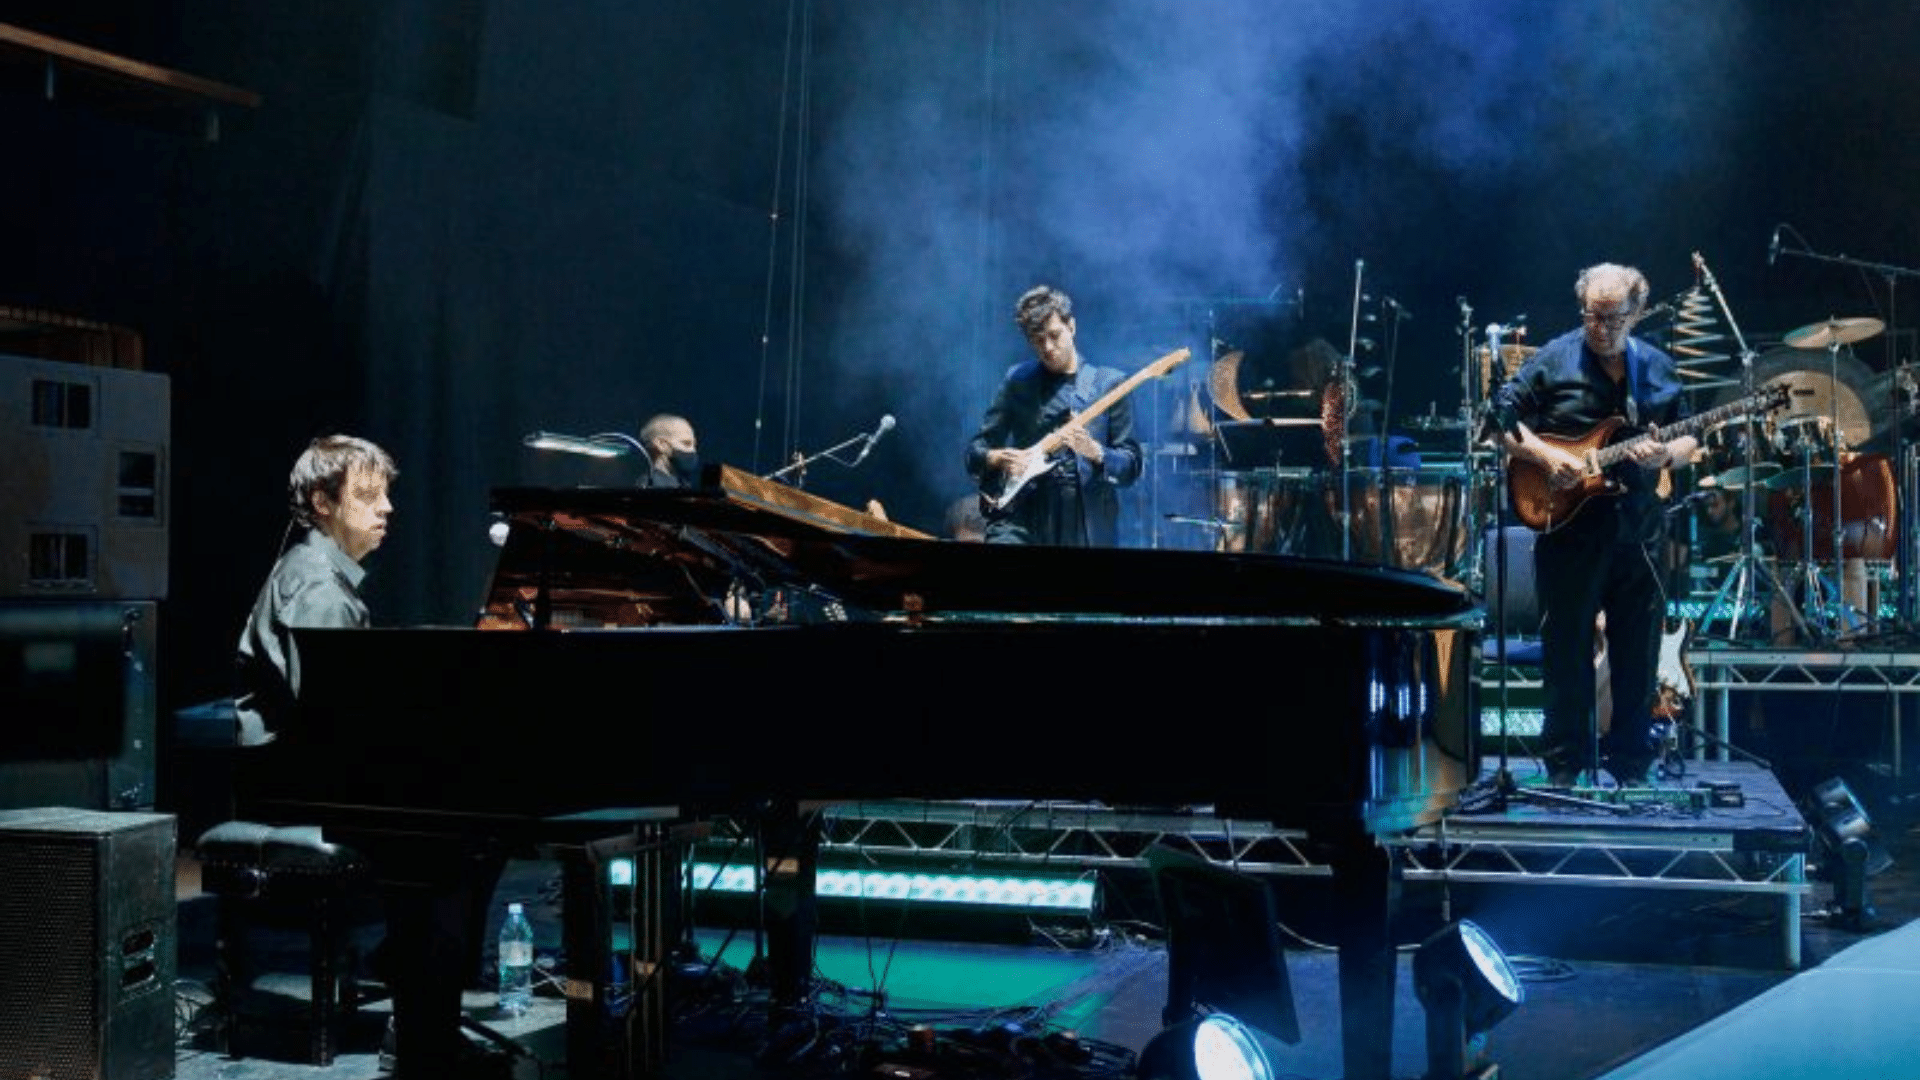 A man playing at a black grand piano. In the background, two men play electric guitars.